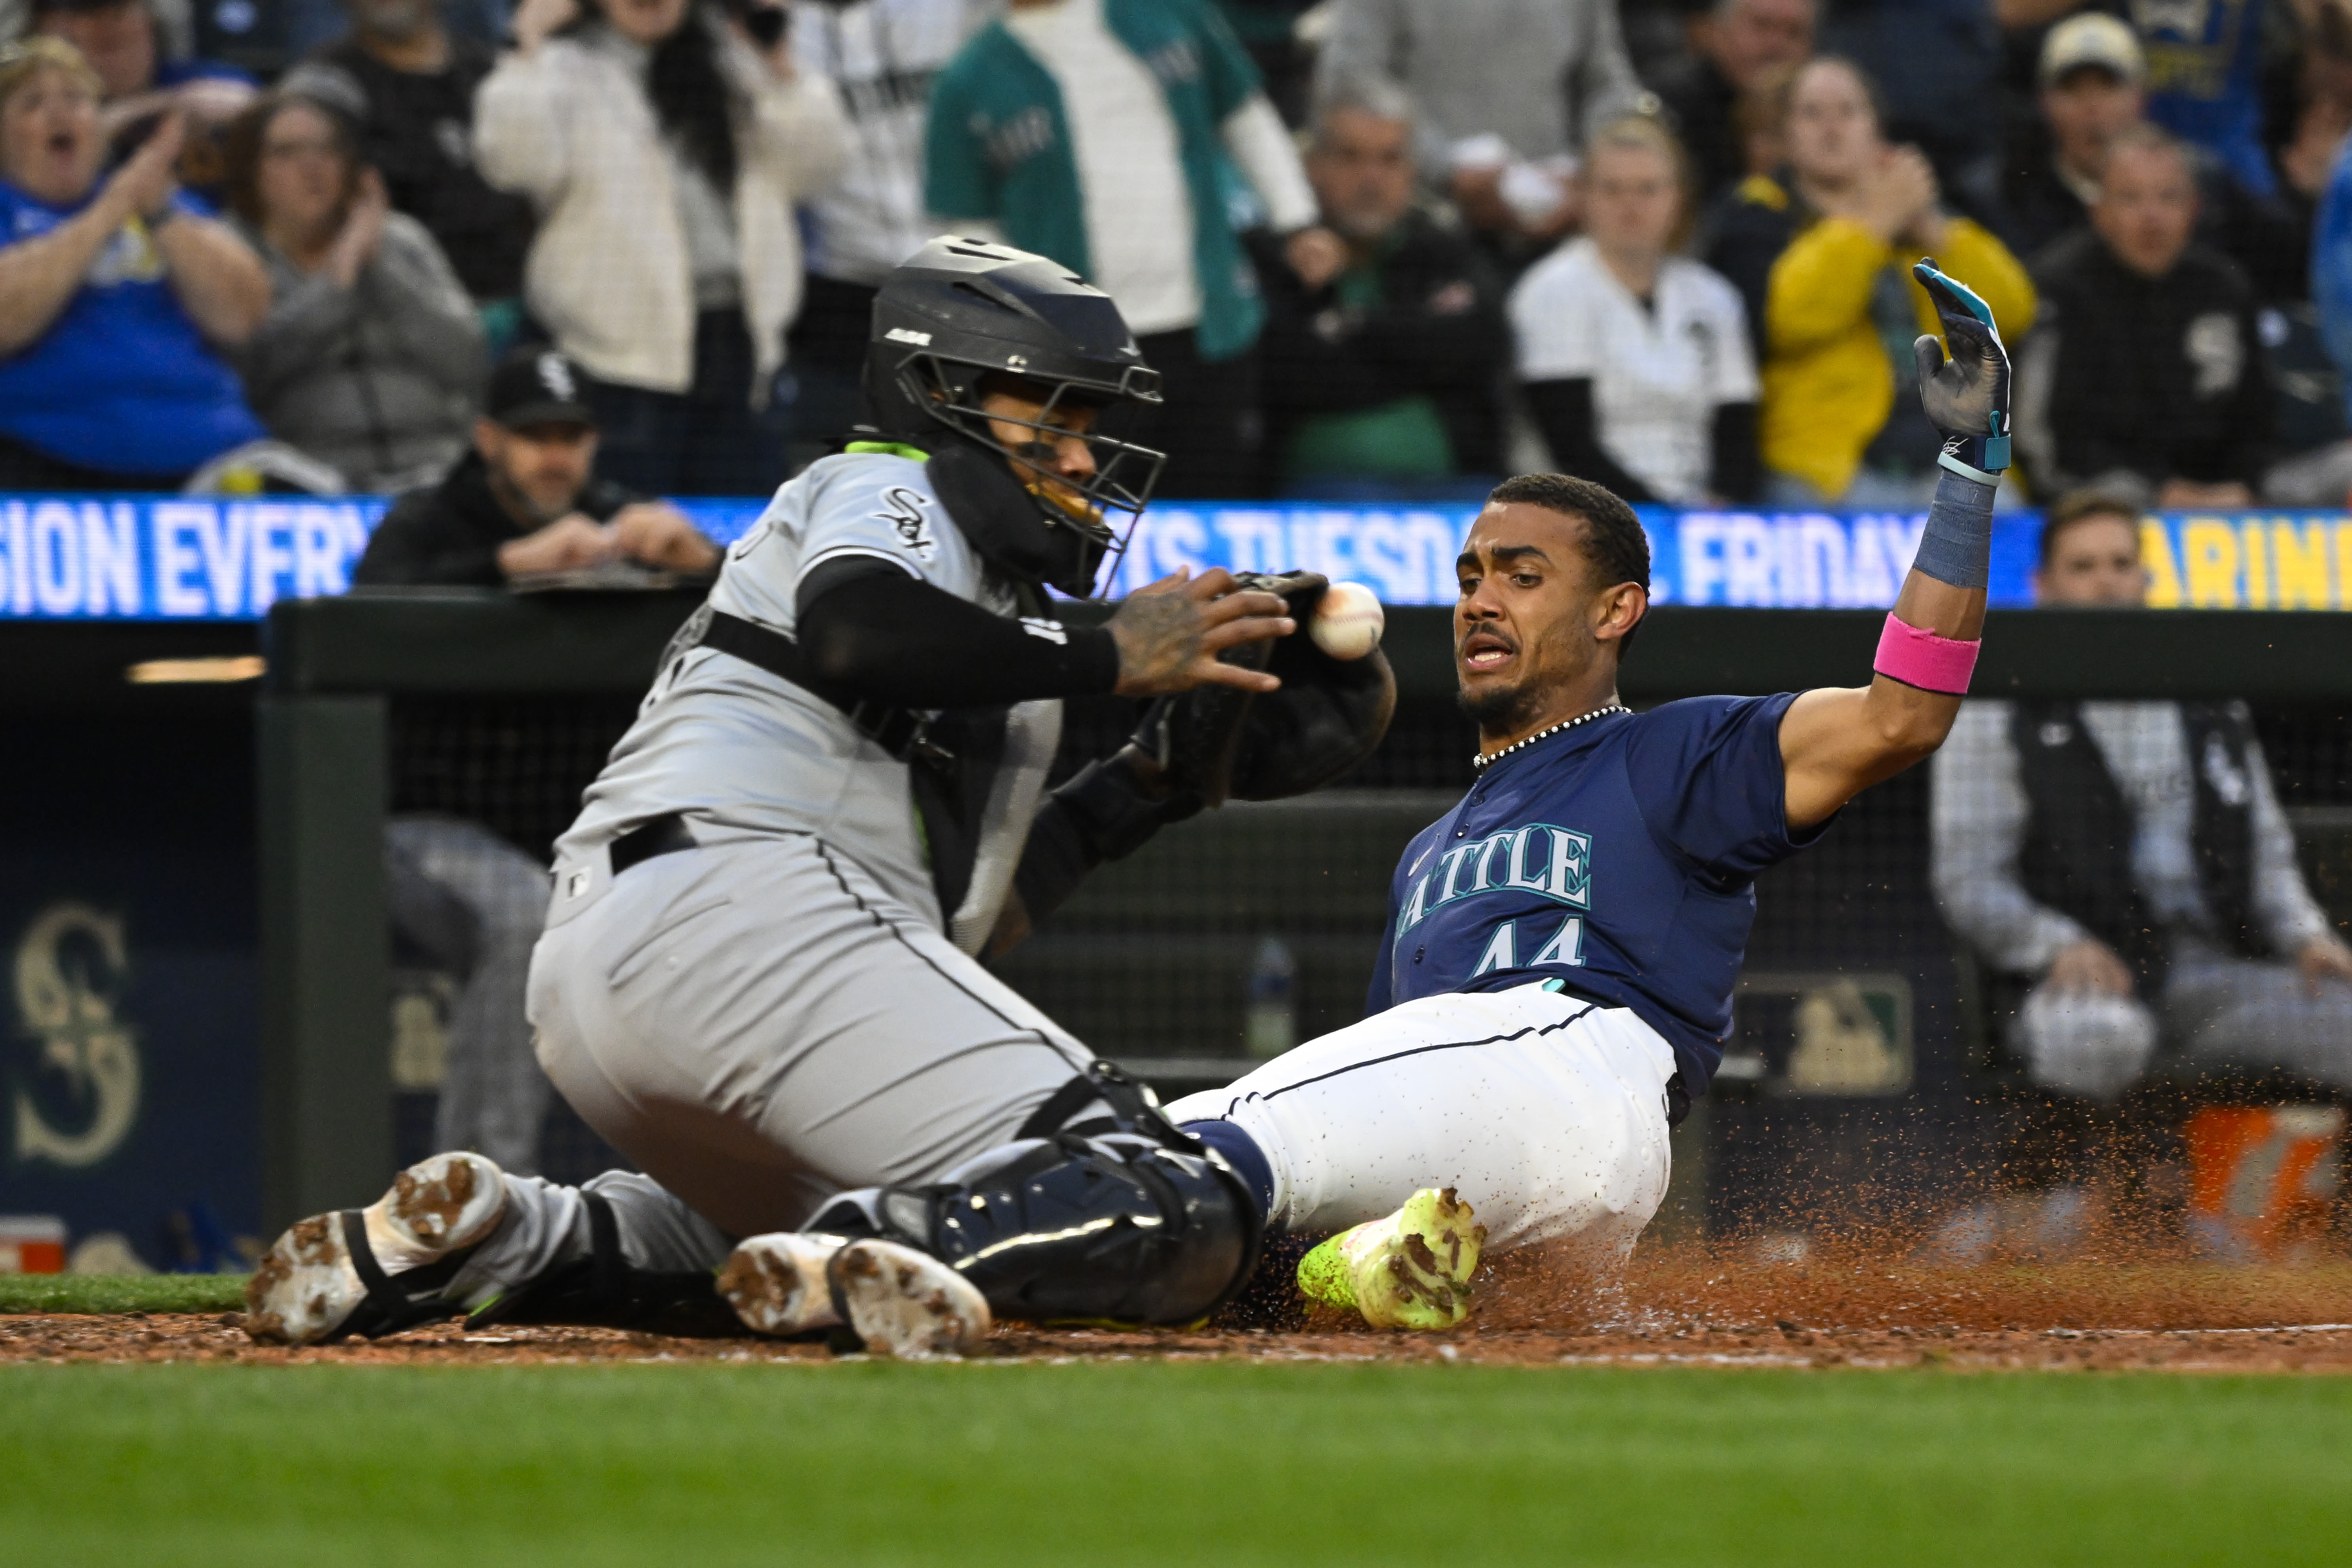 Cal Raleigh drives in go-ahead run in 7th as Mariners beat White Sox 4-3